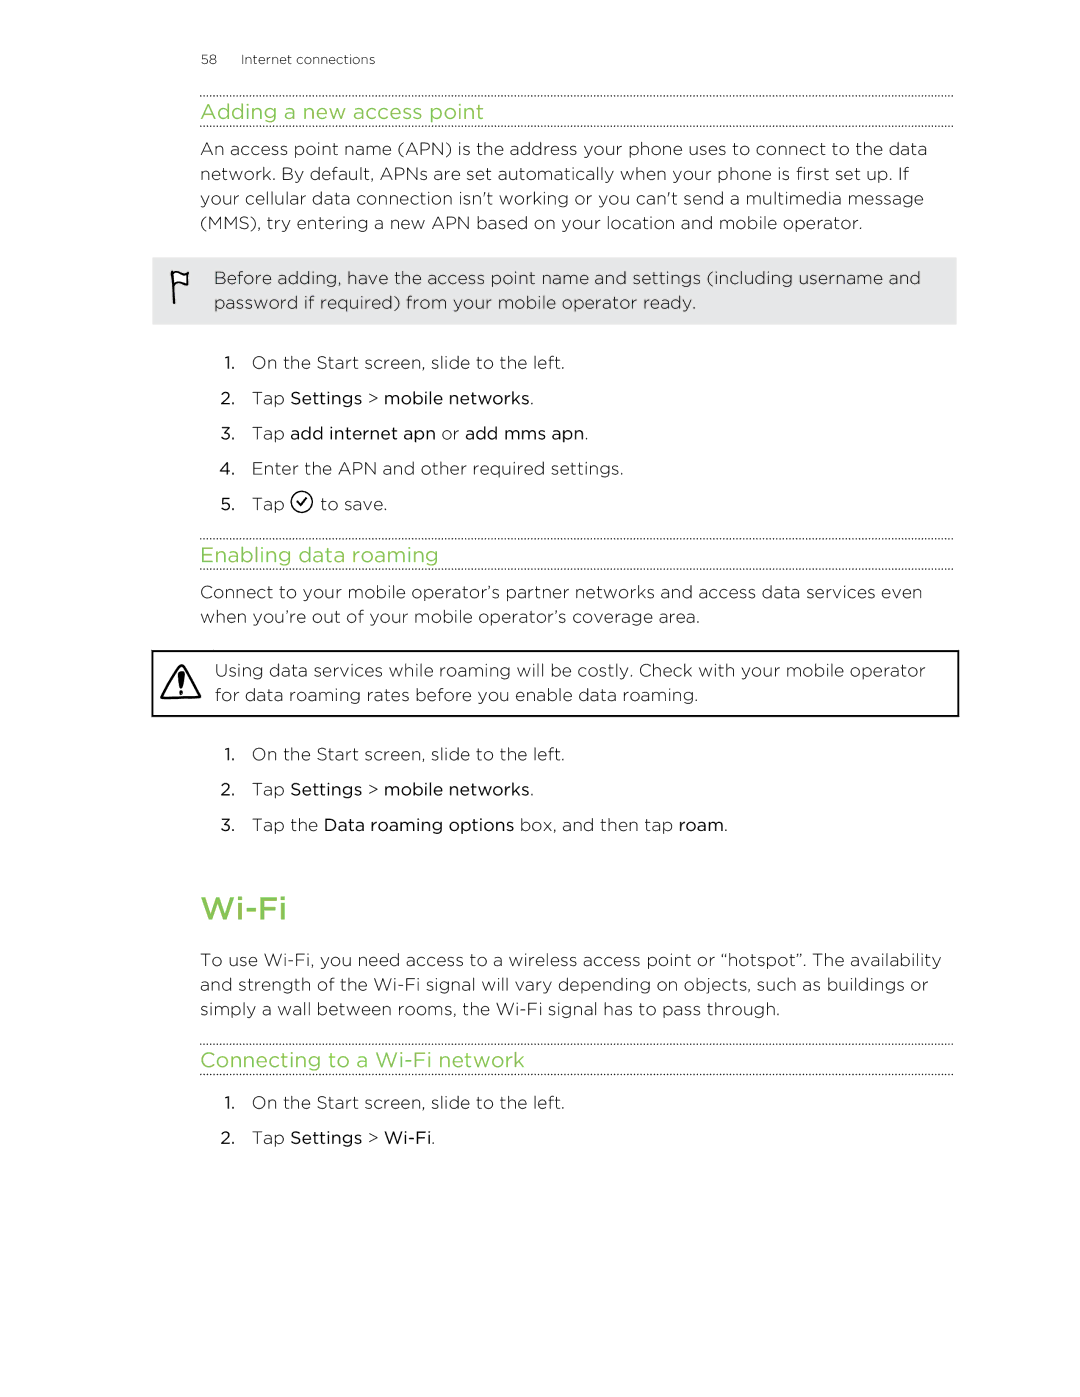 HTC 8X manual Adding a new access point, Enabling data roaming, Connecting to a Wi-Fi network 